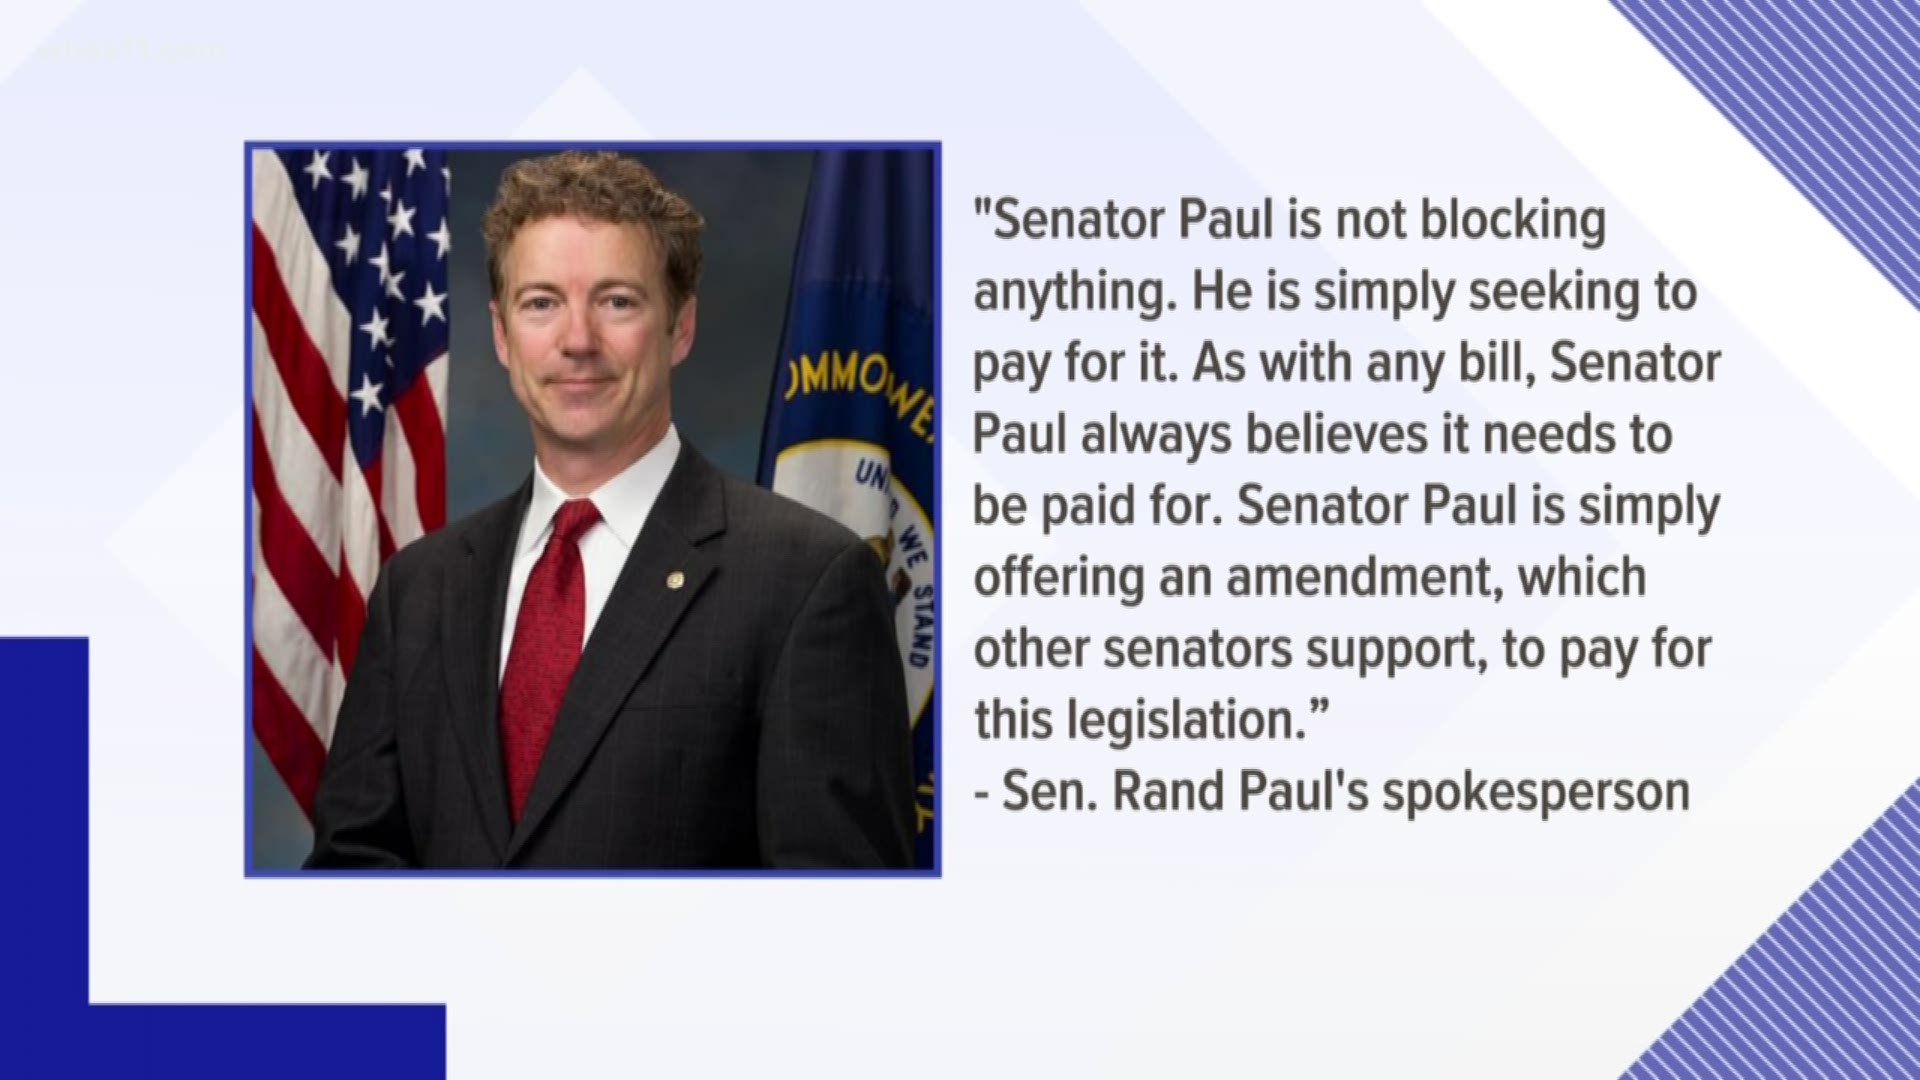 Sen. Paul is the focus of more national criticism after blocking a vote on the fund giving financial support to victims of 9/11 still dealing with serious medical issues.